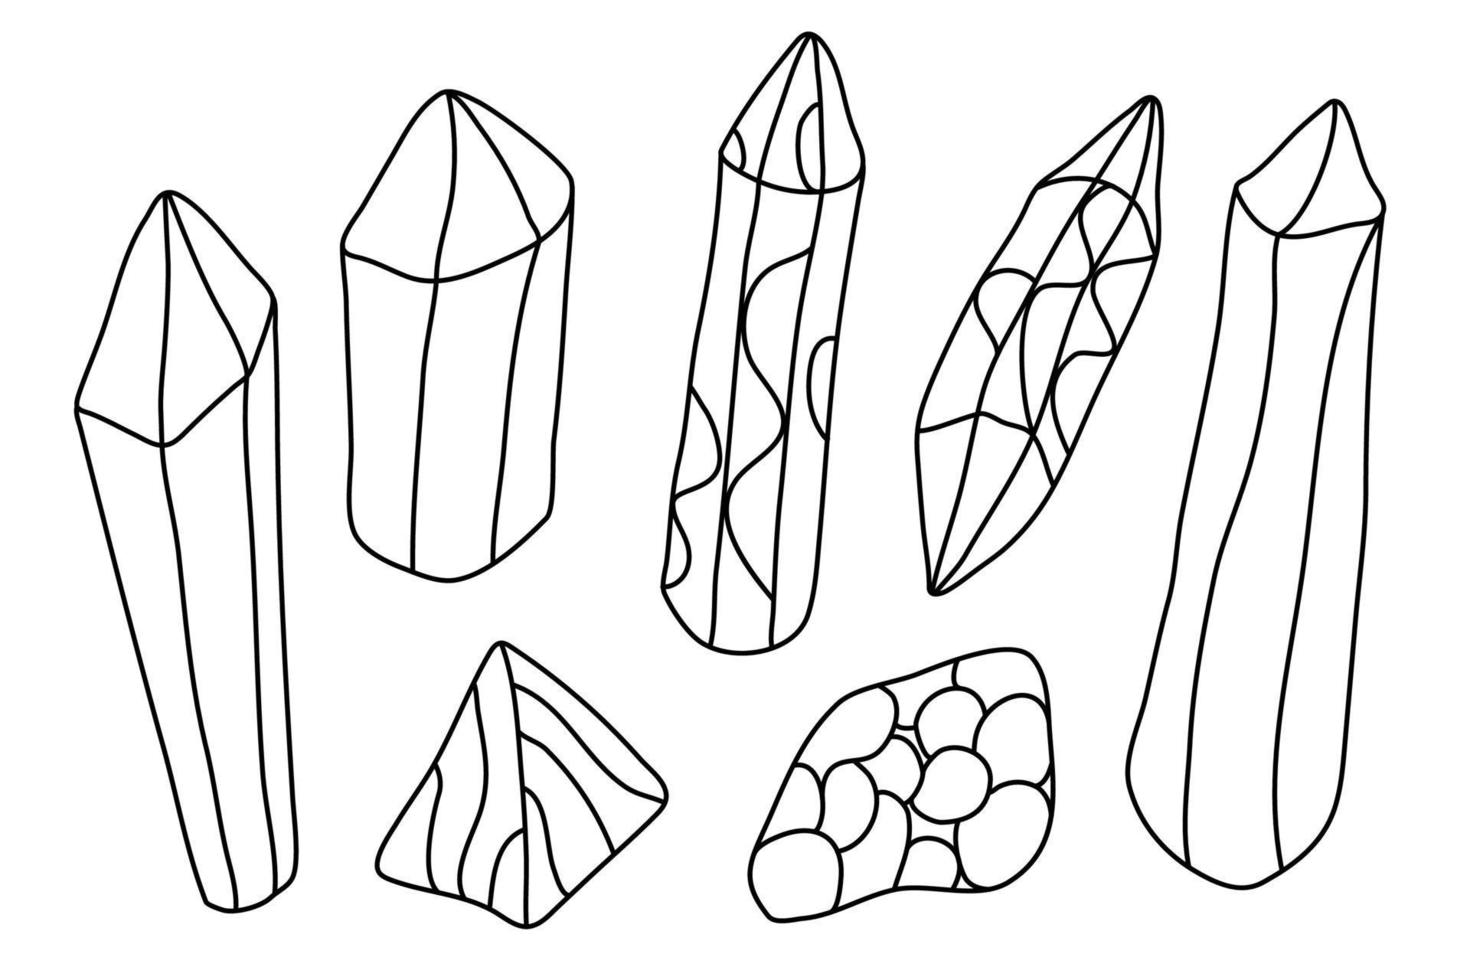 Set with crystals in doodle sketch style. Alternative medicine. Isolated outline. Hand drawn vector illustration in black ink on white background.